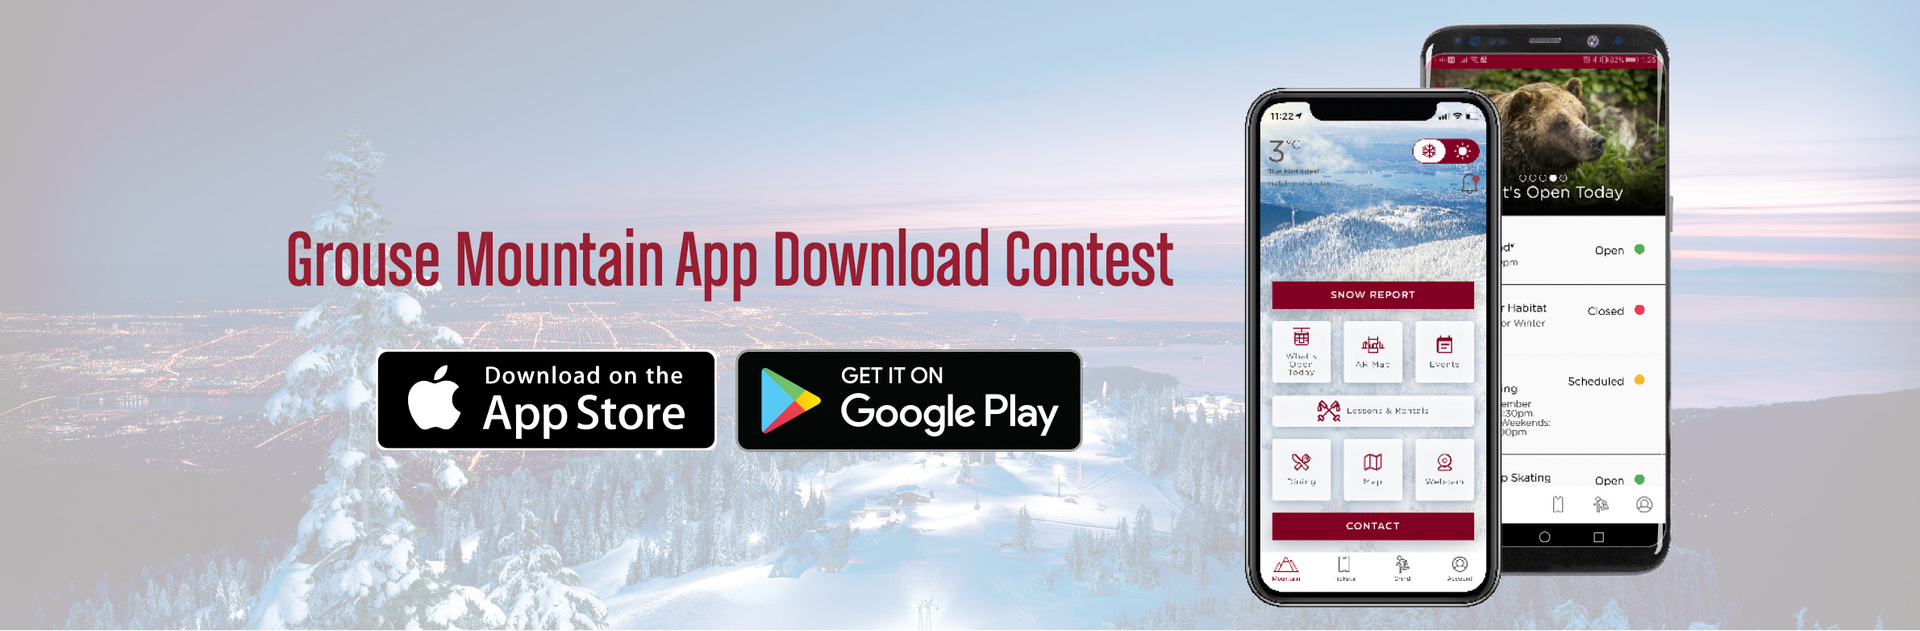 Download the new Grouse Mountain app for a chance to win an Apple Watch or Samsung Watch